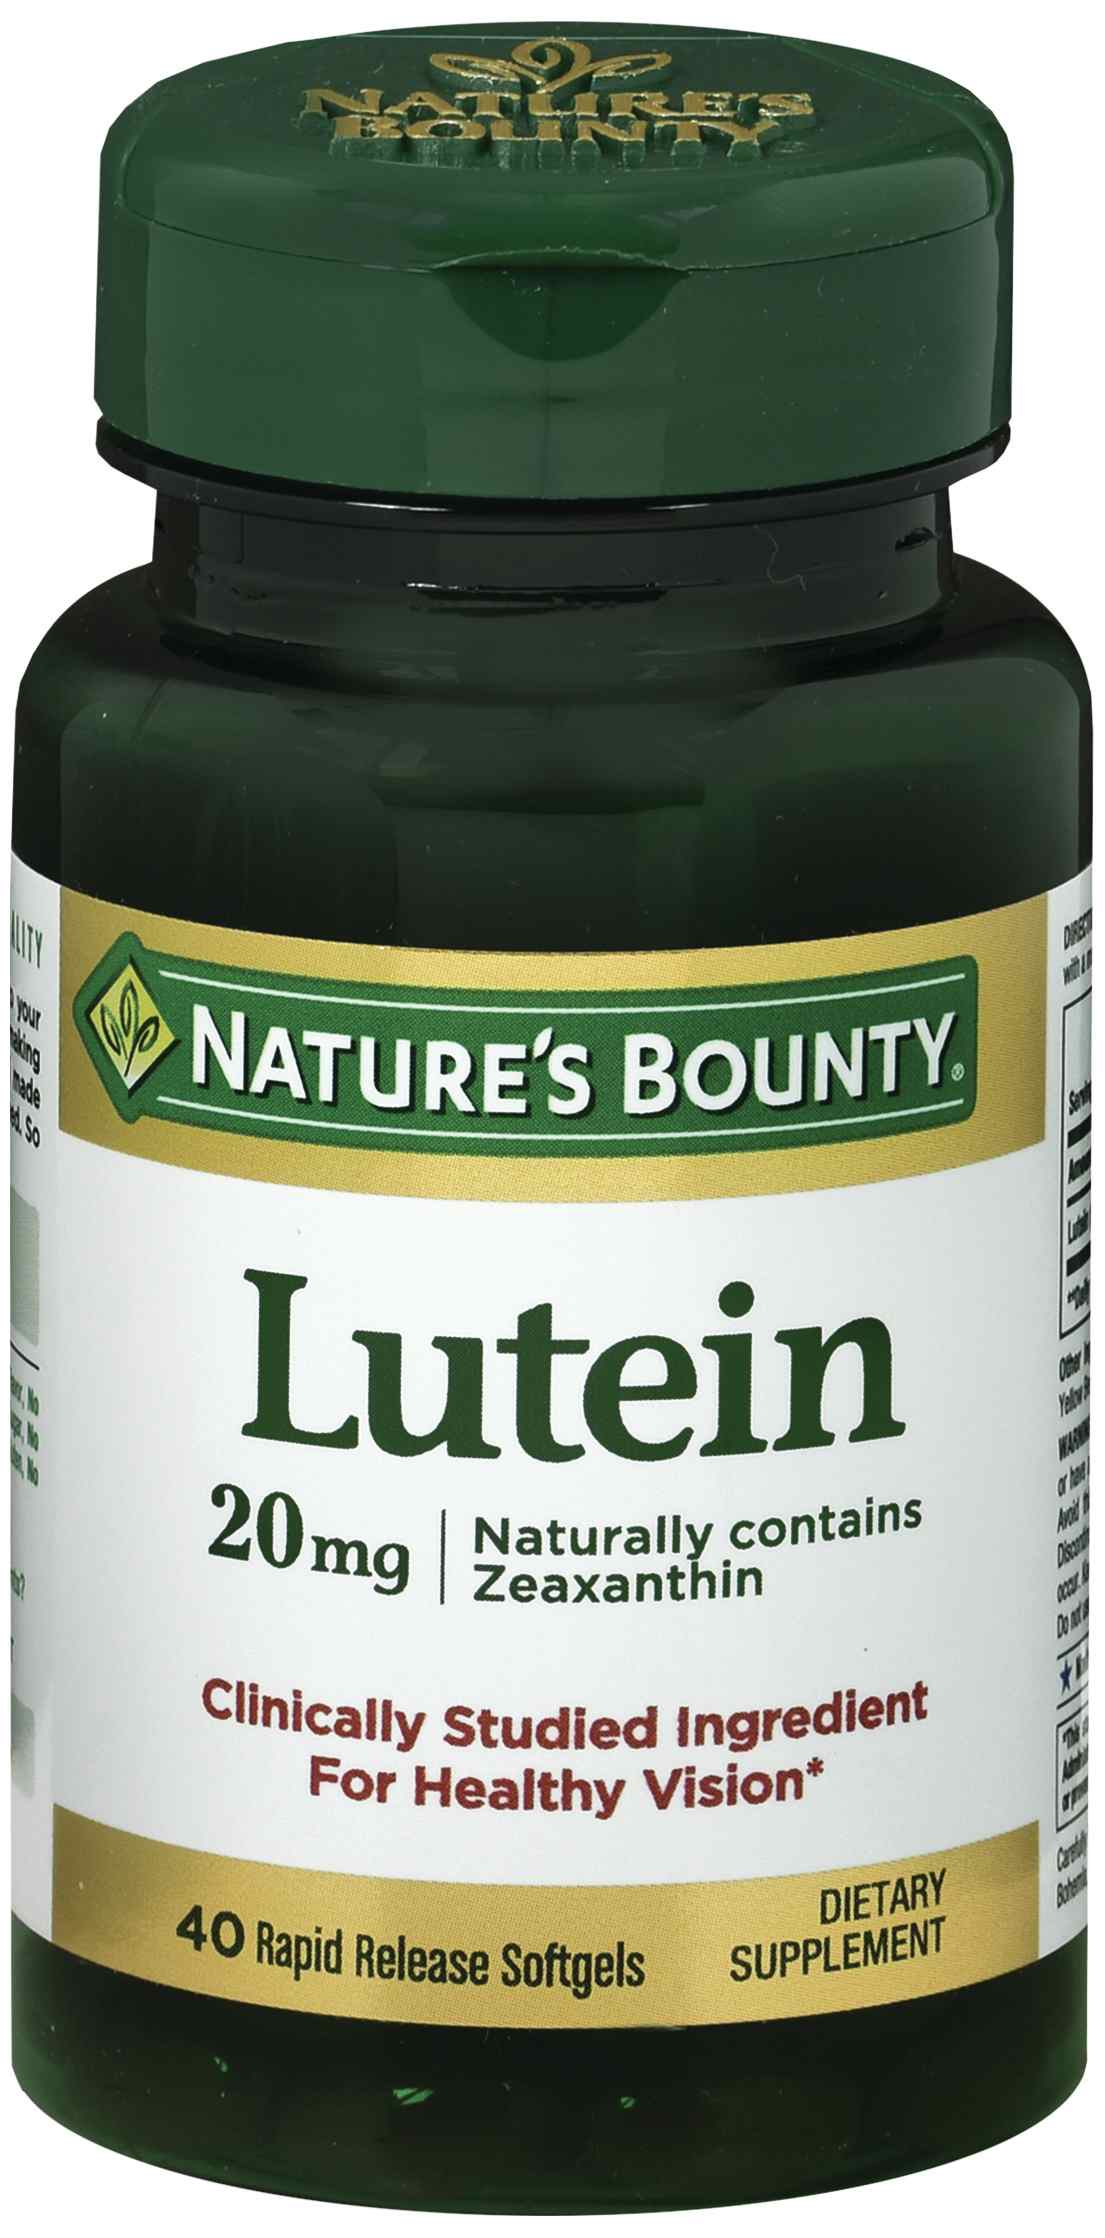 Nature's Bounty Lutein Eye Vitamin Supplement, 20 mg, 20 Tablets, 74312049026, 1 Bottle